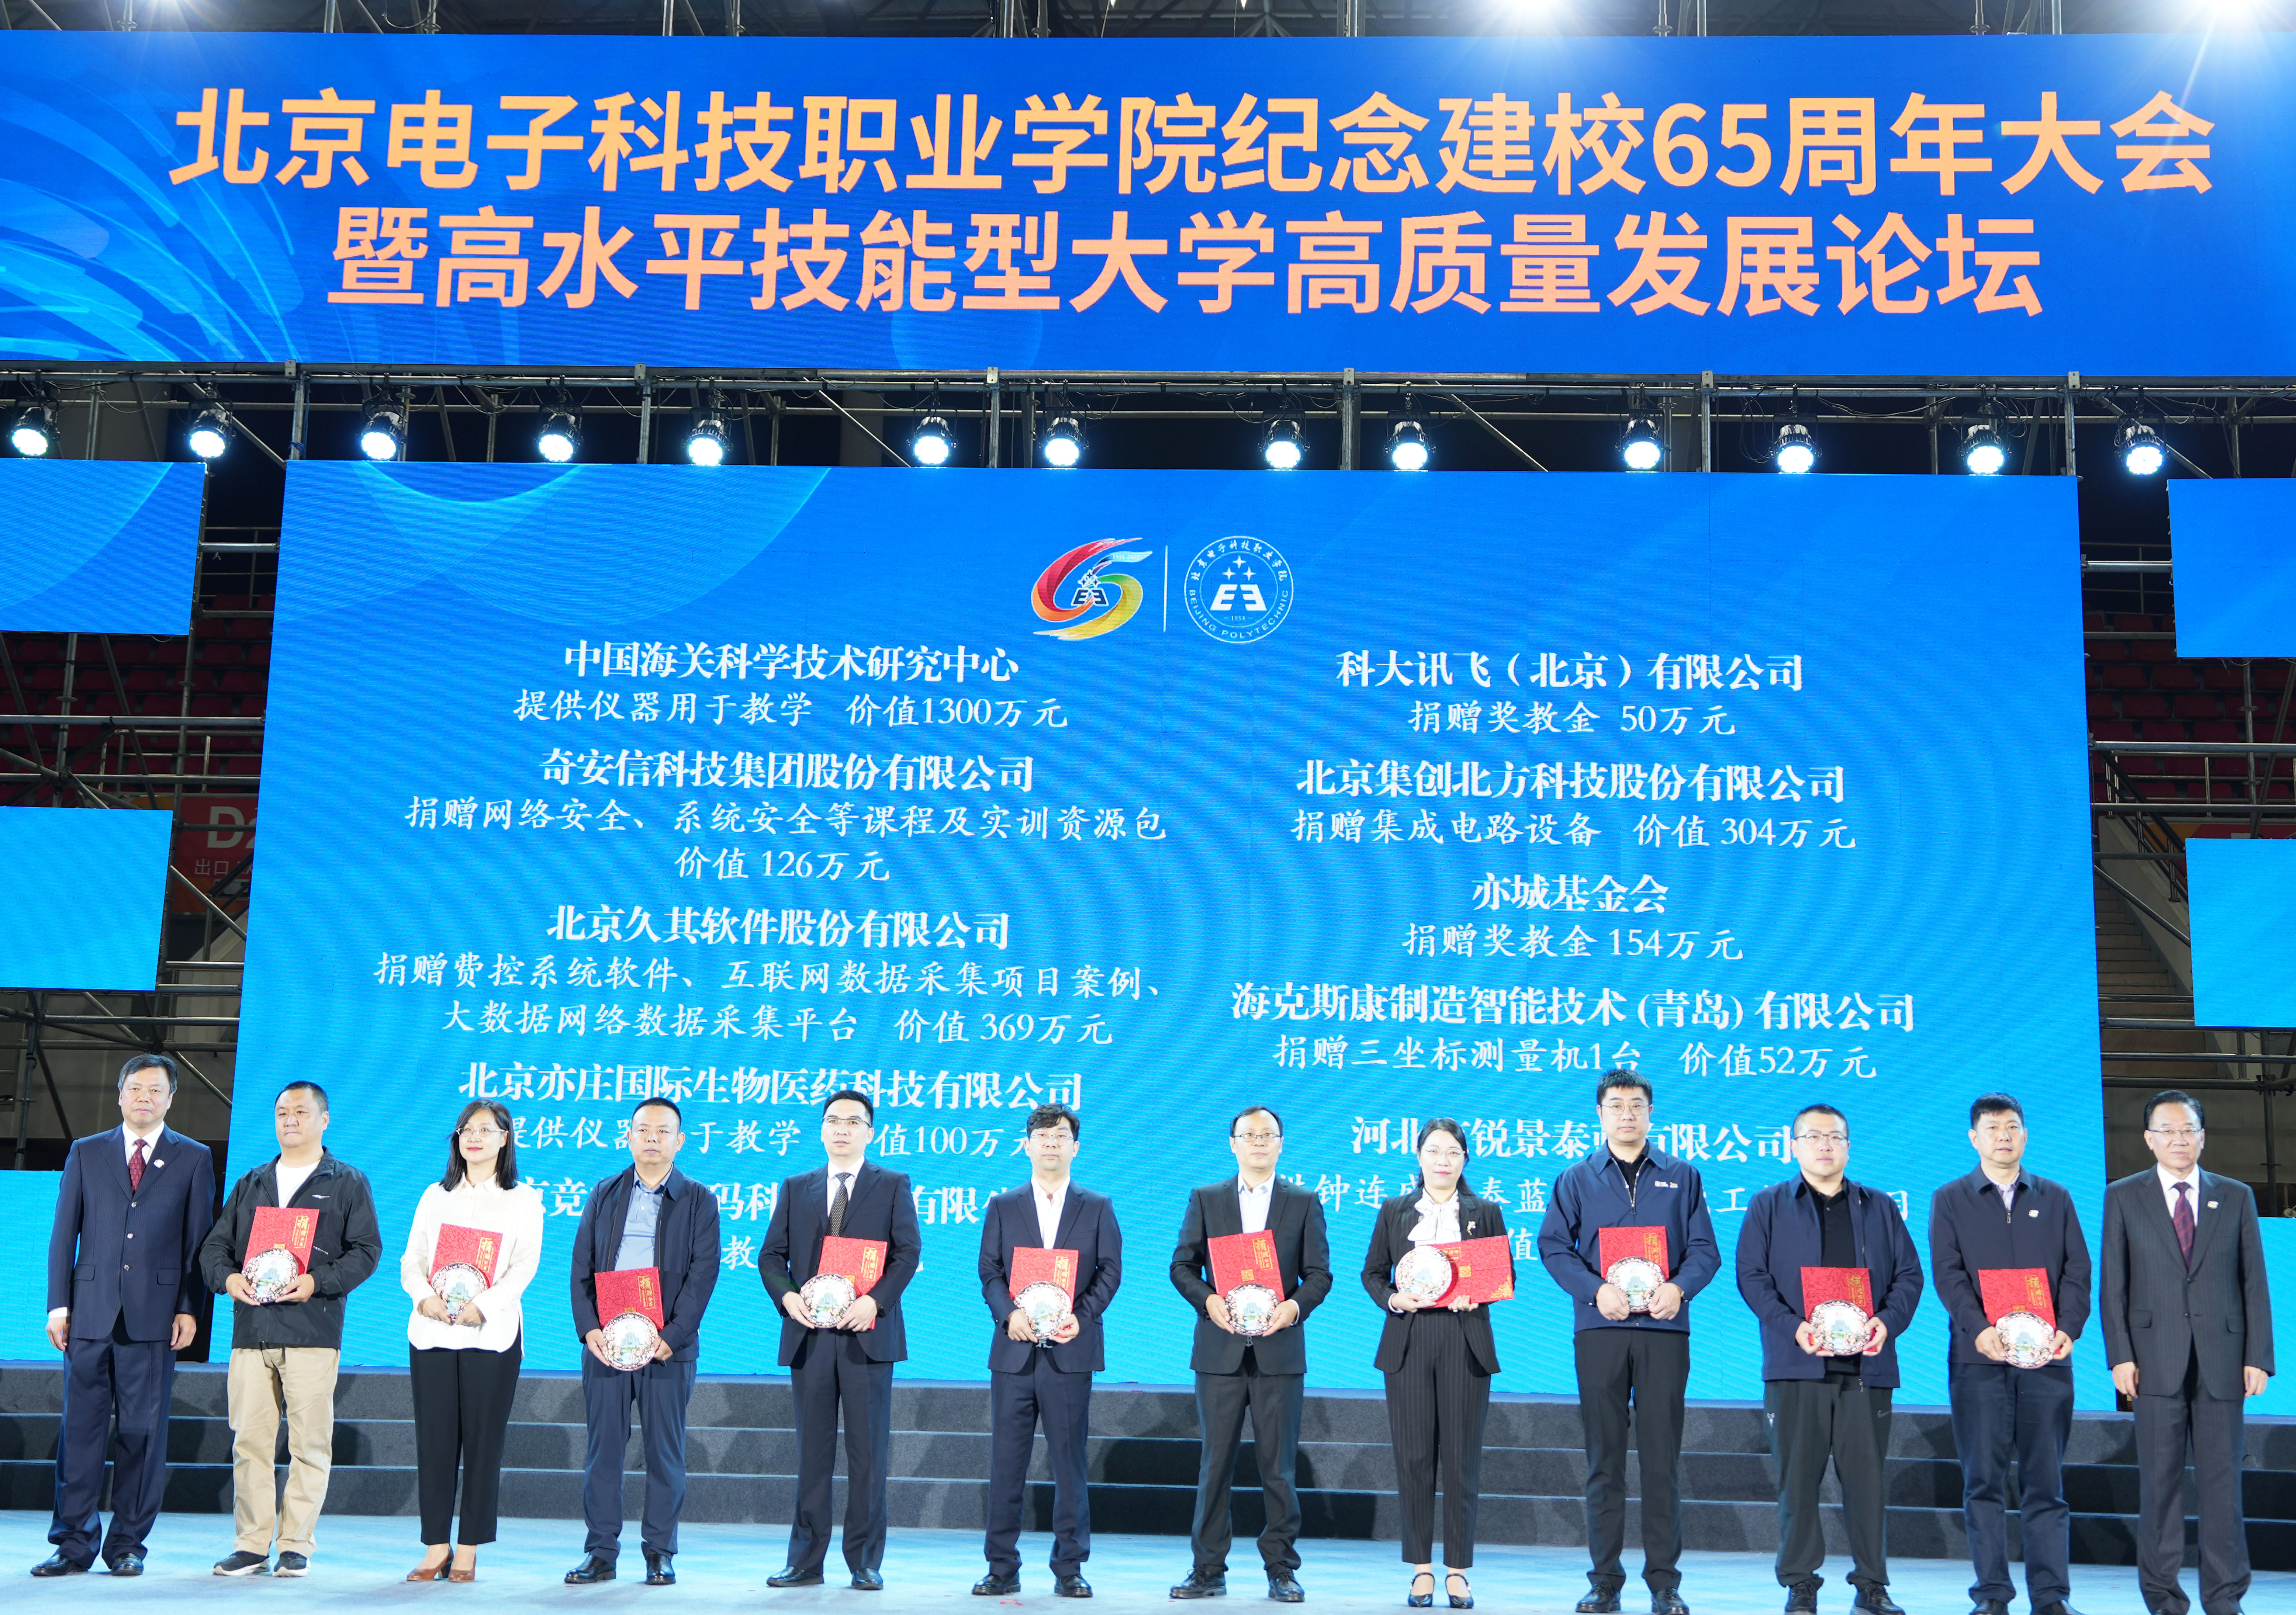 Chipone attended the 65th anniversary meeting of Beijing Polytechnic   